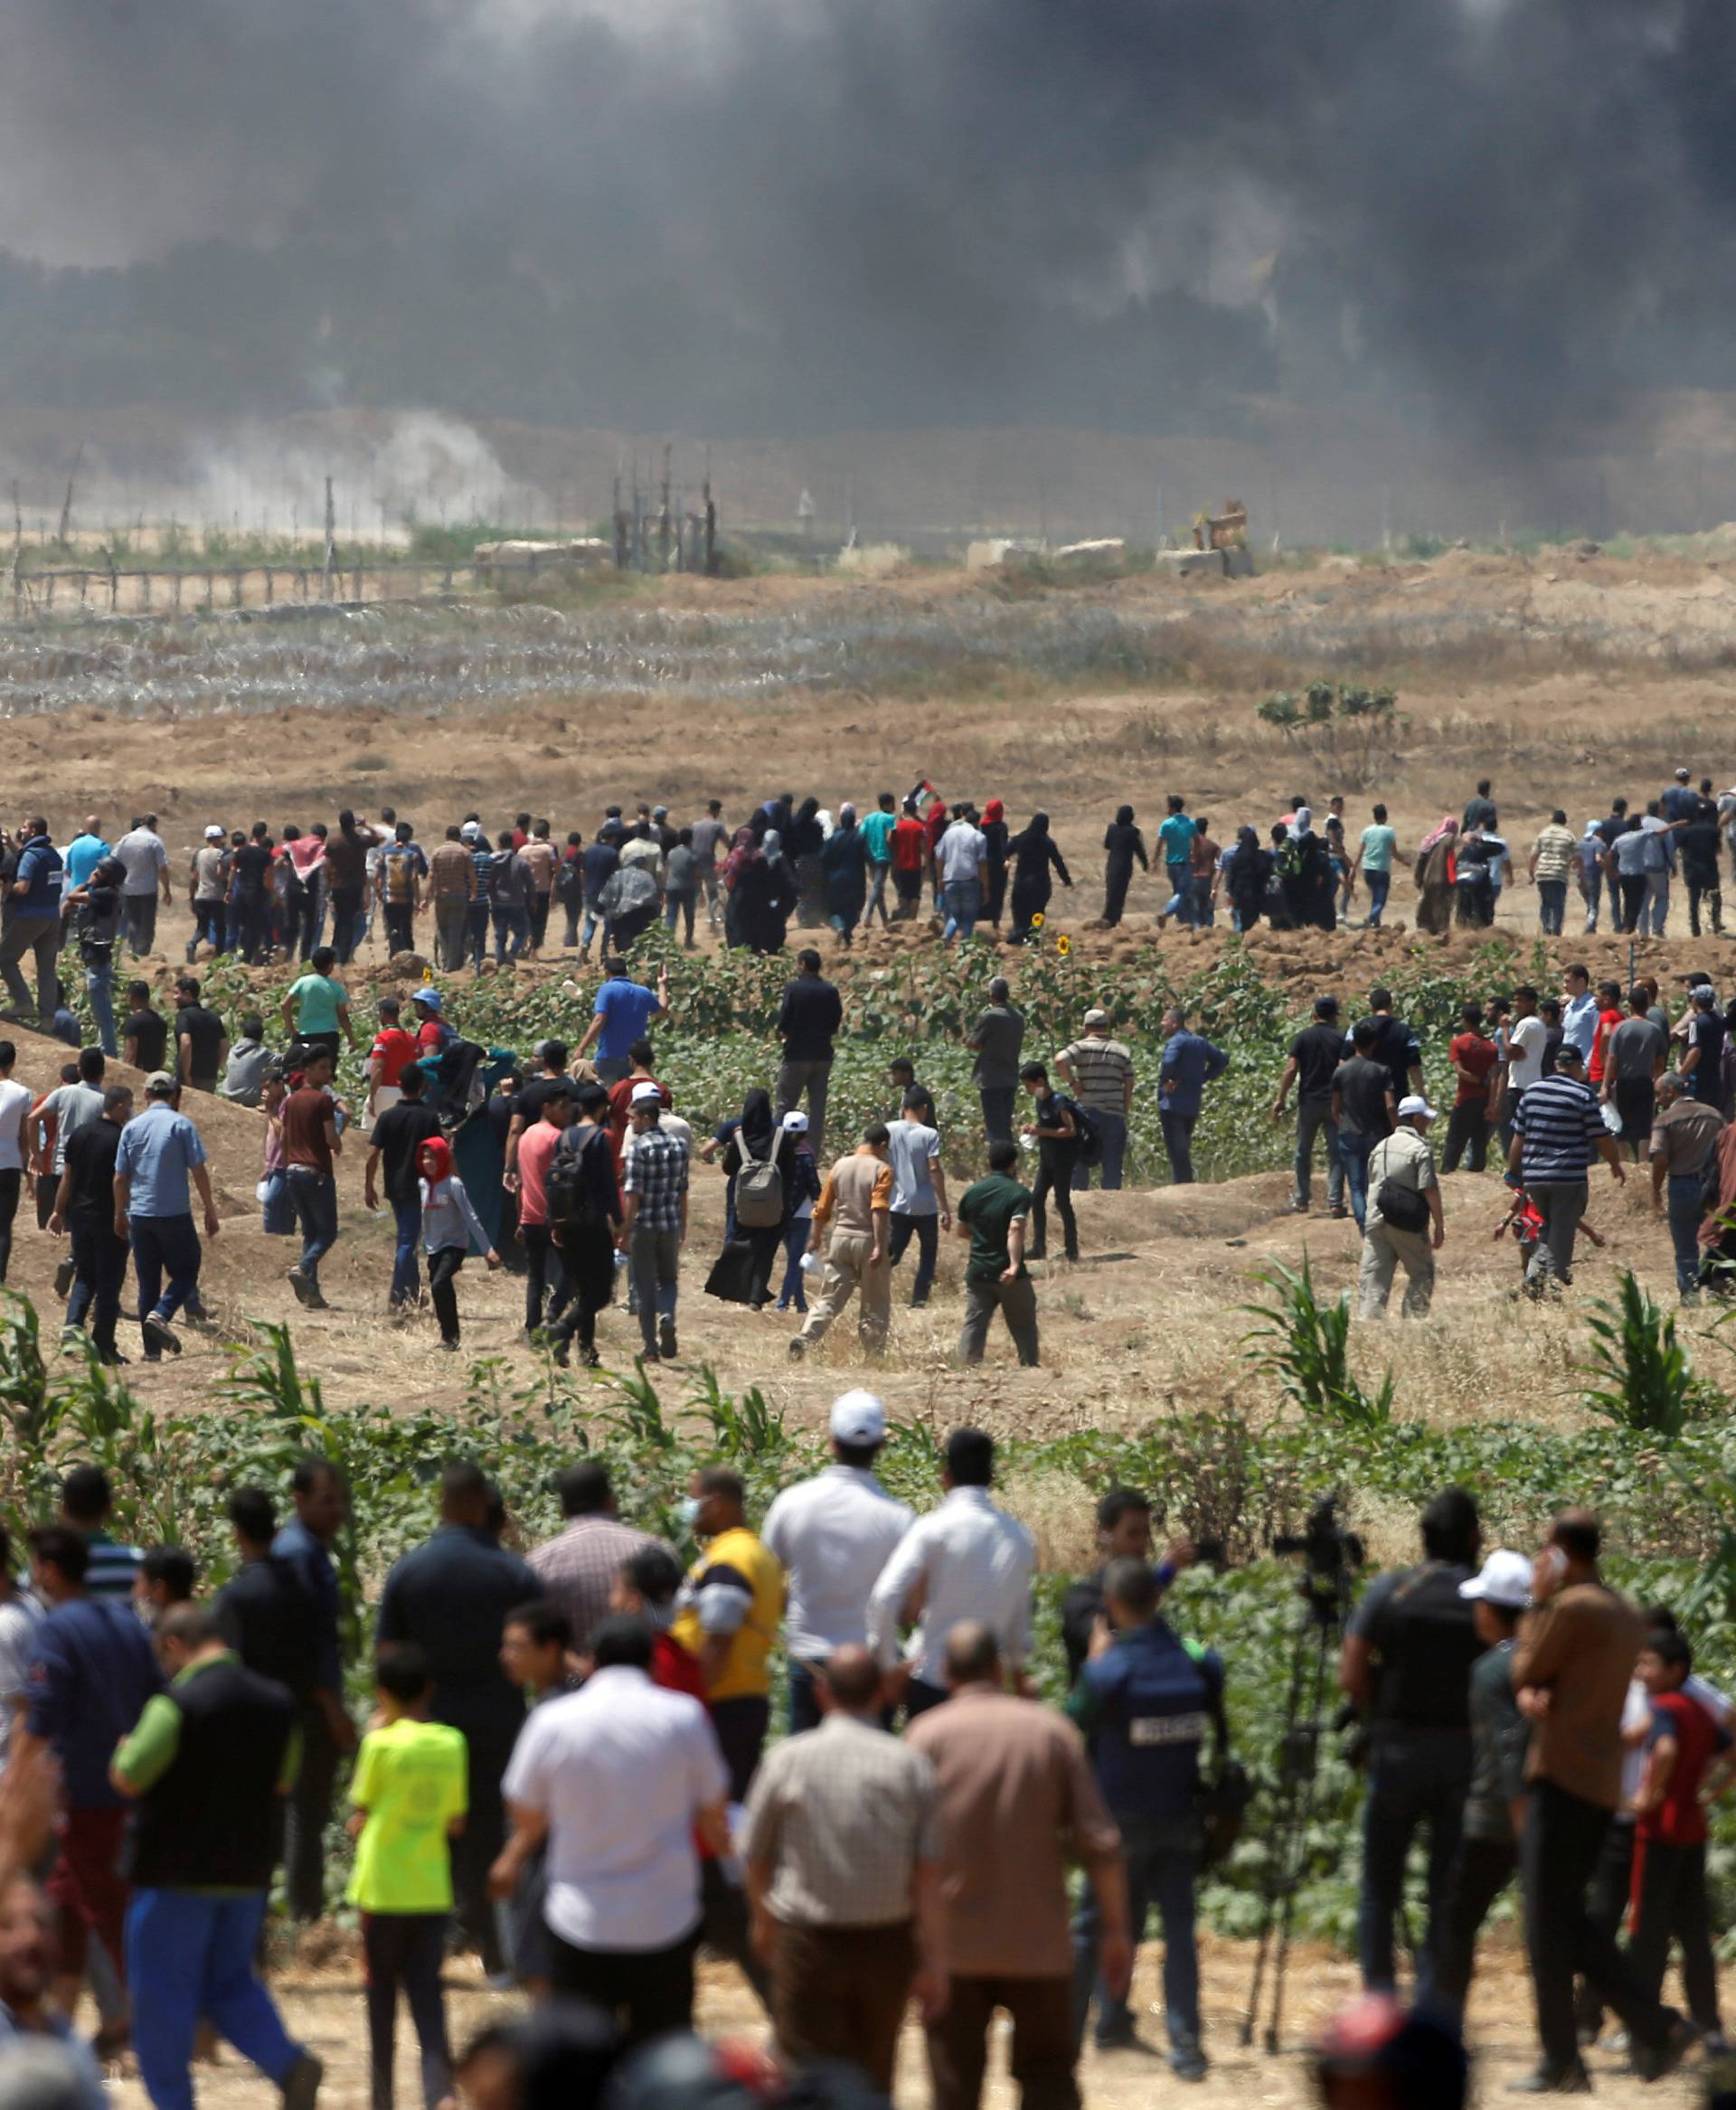 Palestinian demonstrators gather at the Israel-Gaza border during a protest against U.S. embassy move to Jerusalem and ahead of the 70th anniversary of Nakba, east of Gaza City